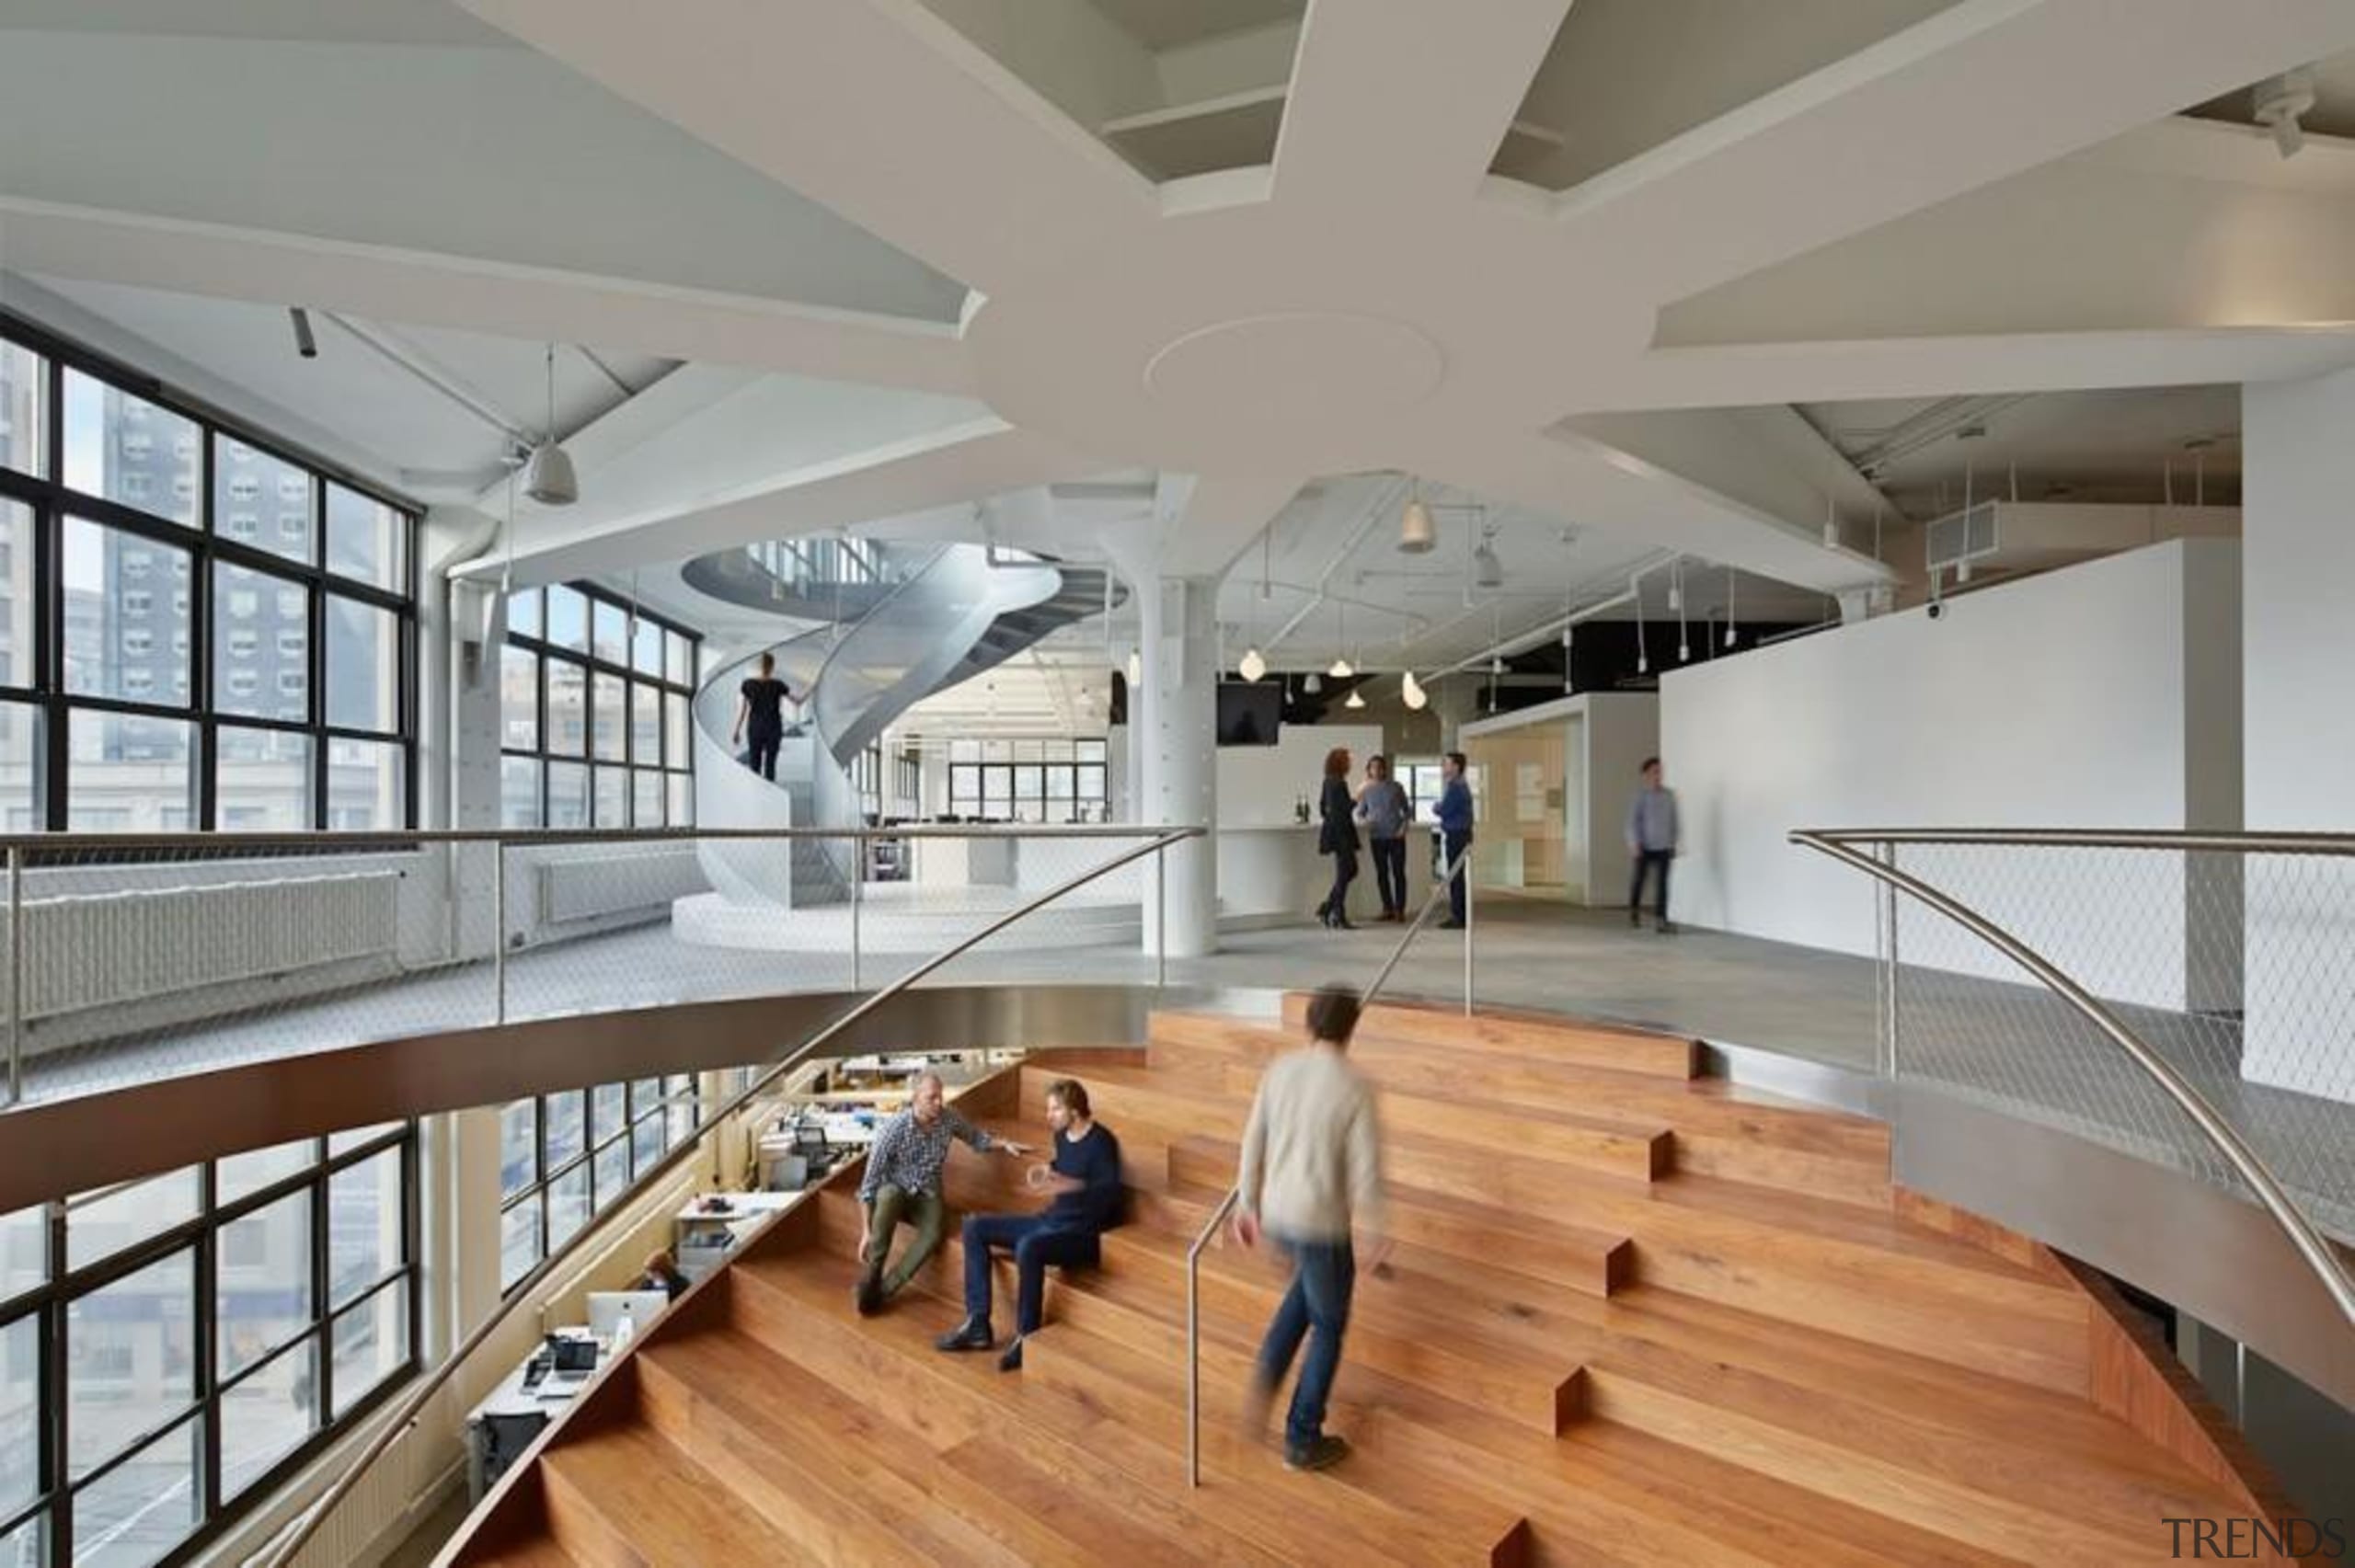 The design for renowned advertising agency Wieden+Kennedy moves architecture, ceiling, daylighting, floor, interior design, lobby, tourist attraction, gray